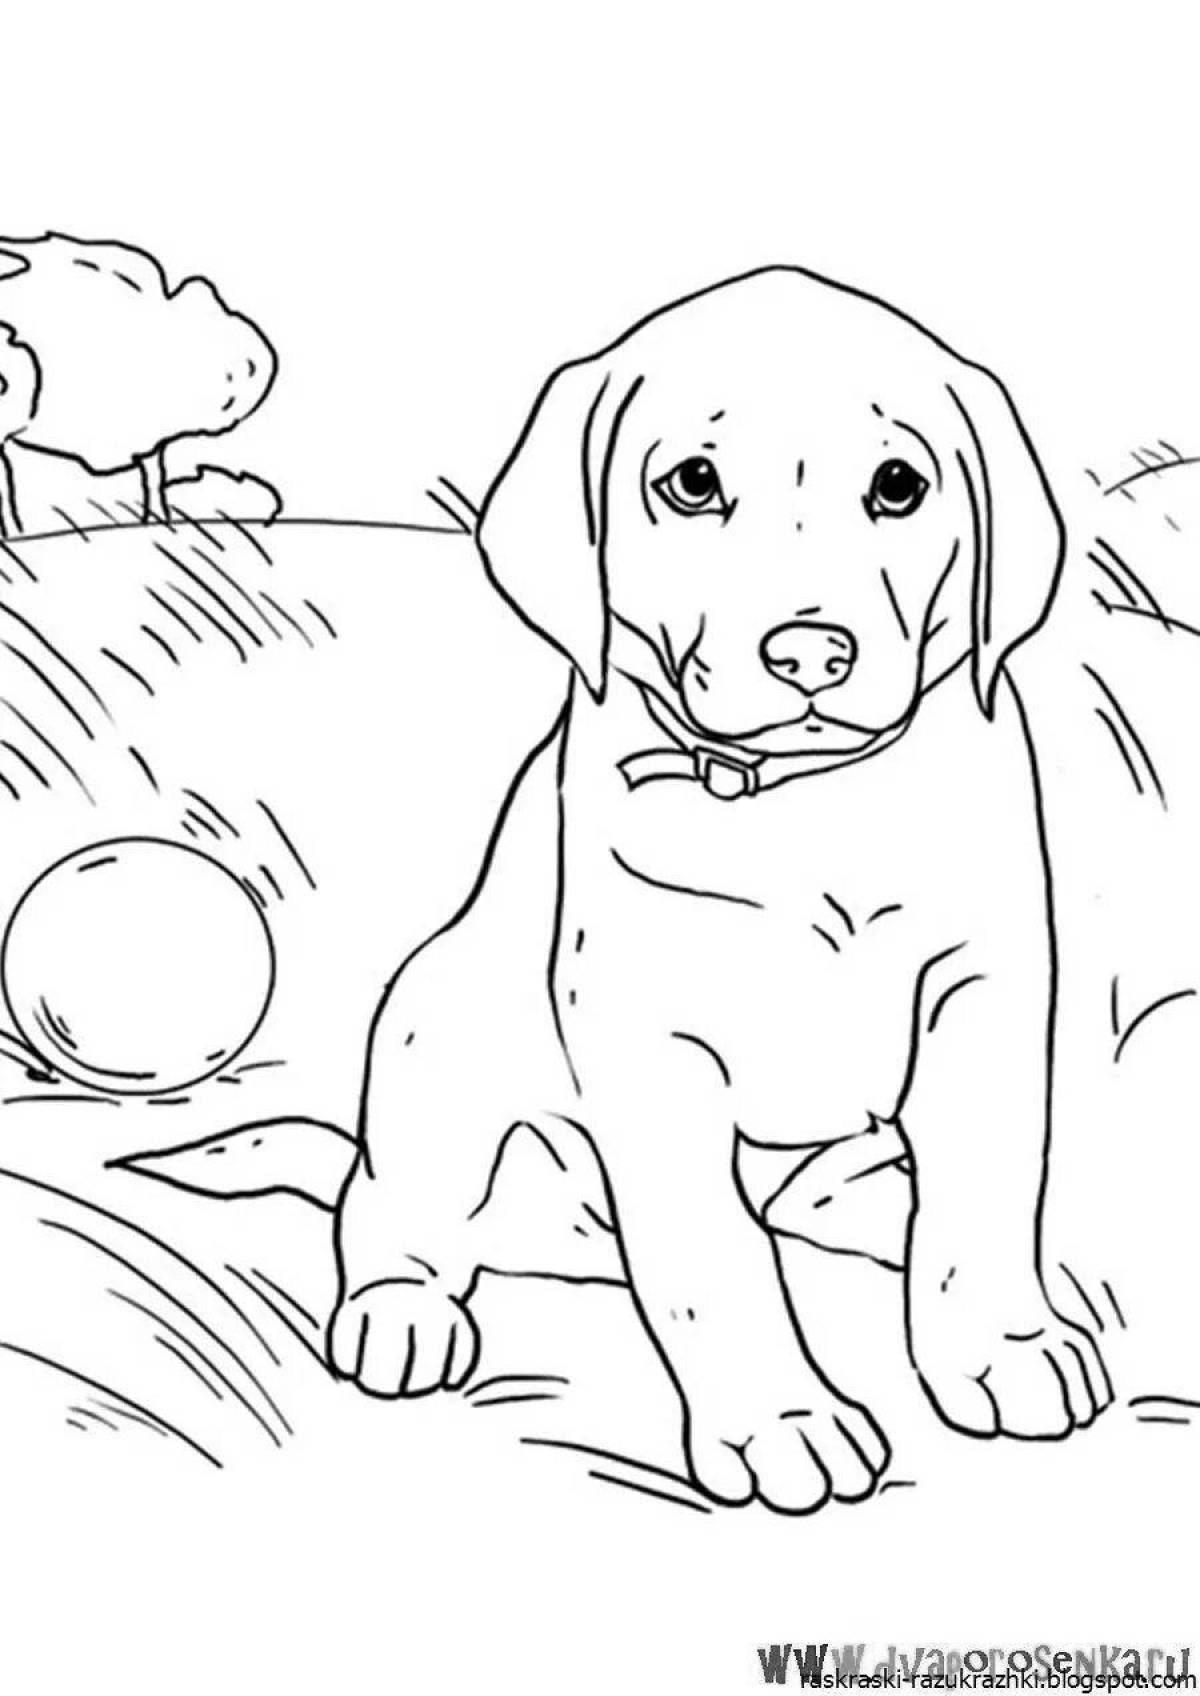 Adorable puppy coloring page